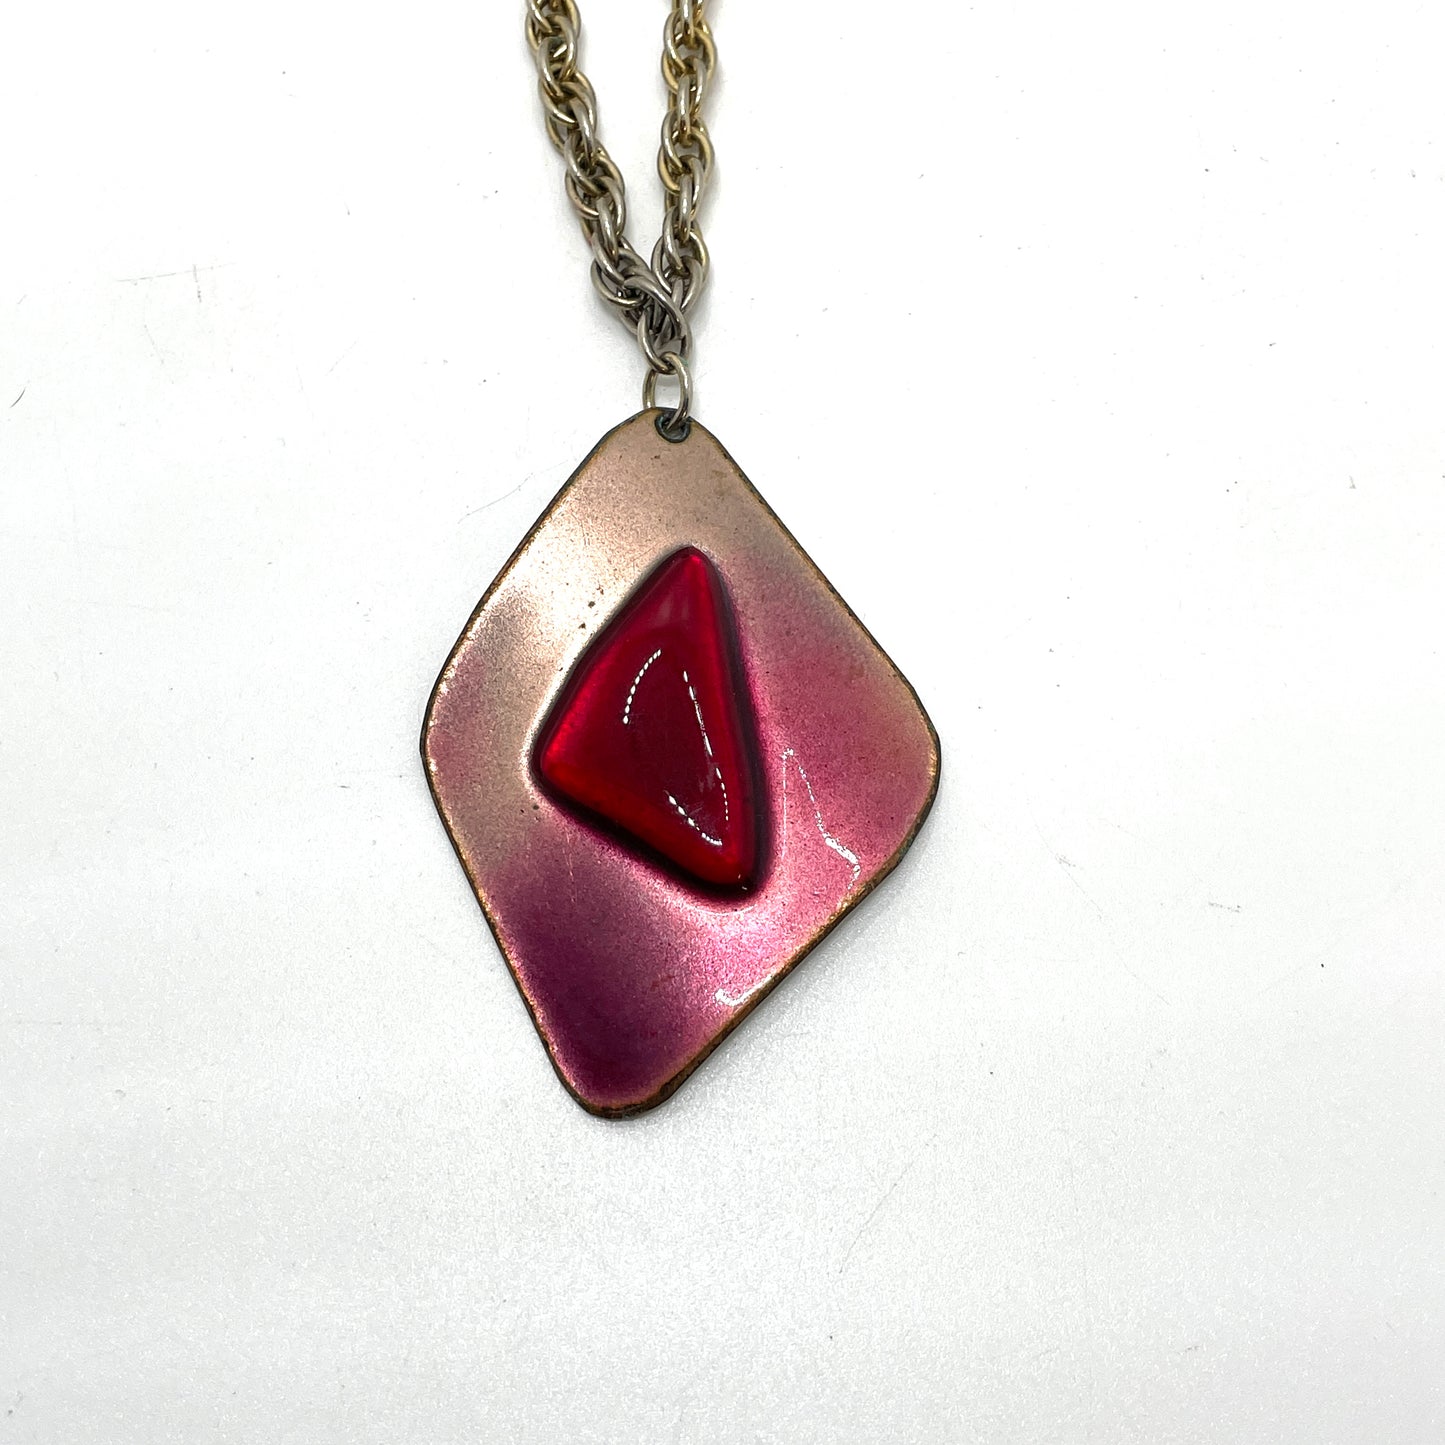 1980s Necklace with Red Enamel Pendant